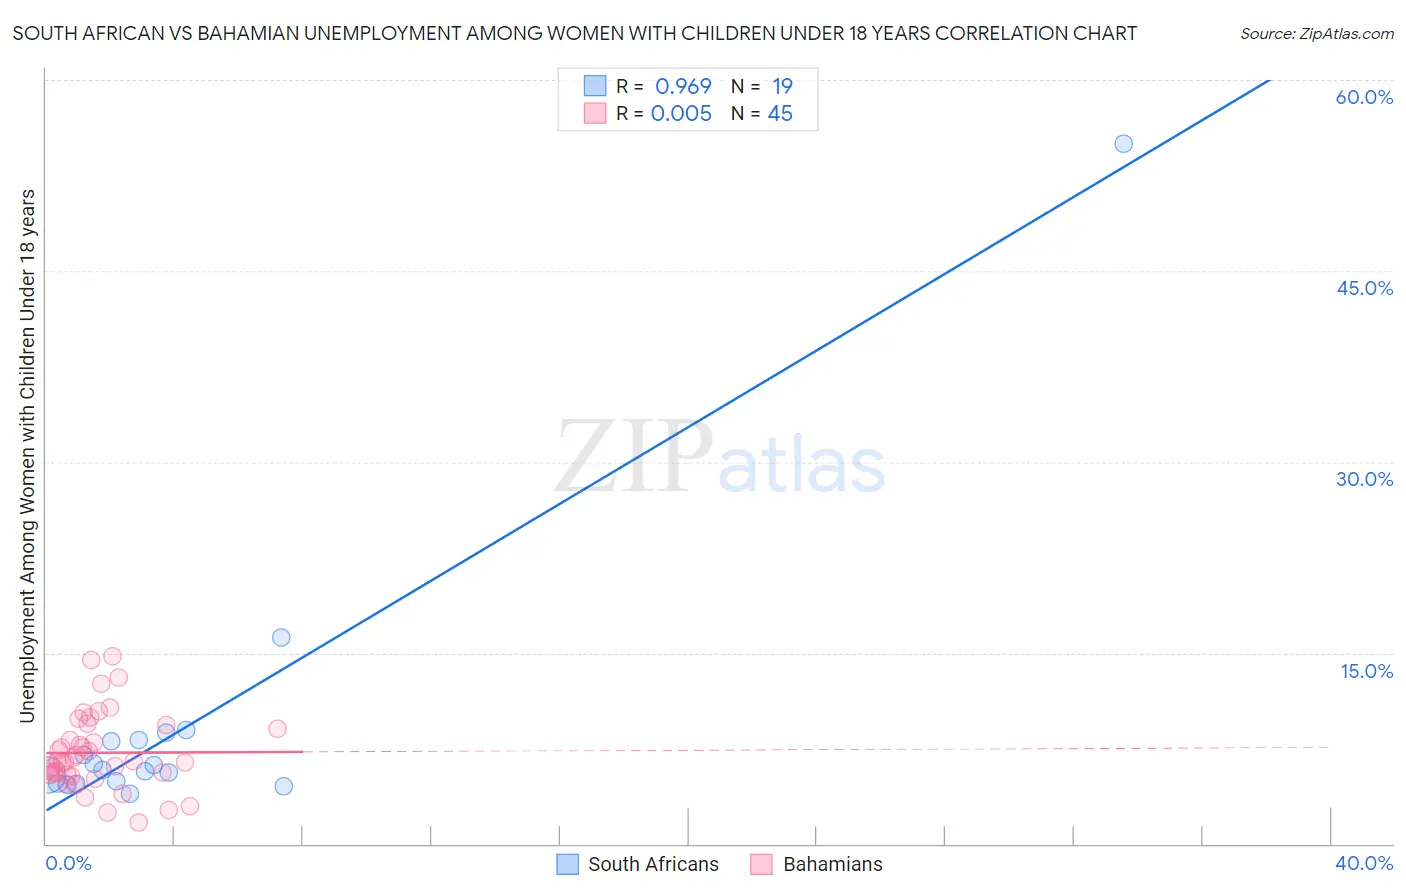 South African vs Bahamian Unemployment Among Women with Children Under 18 years